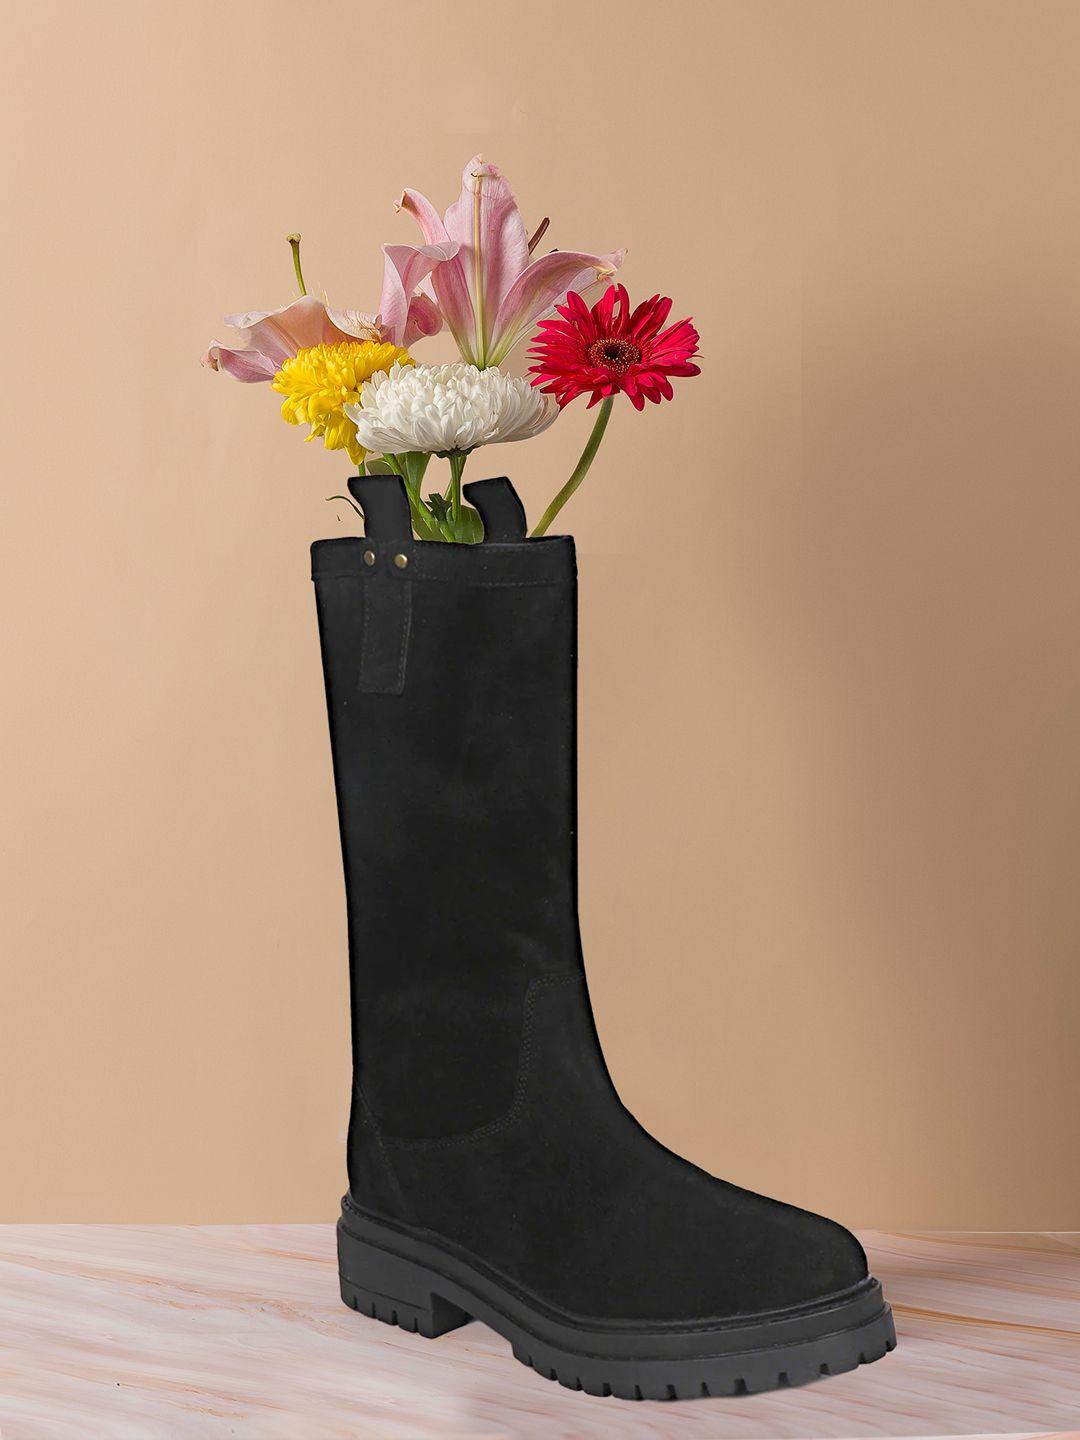 saint-g-women-black-suede-leather-pull-on-calf-boots